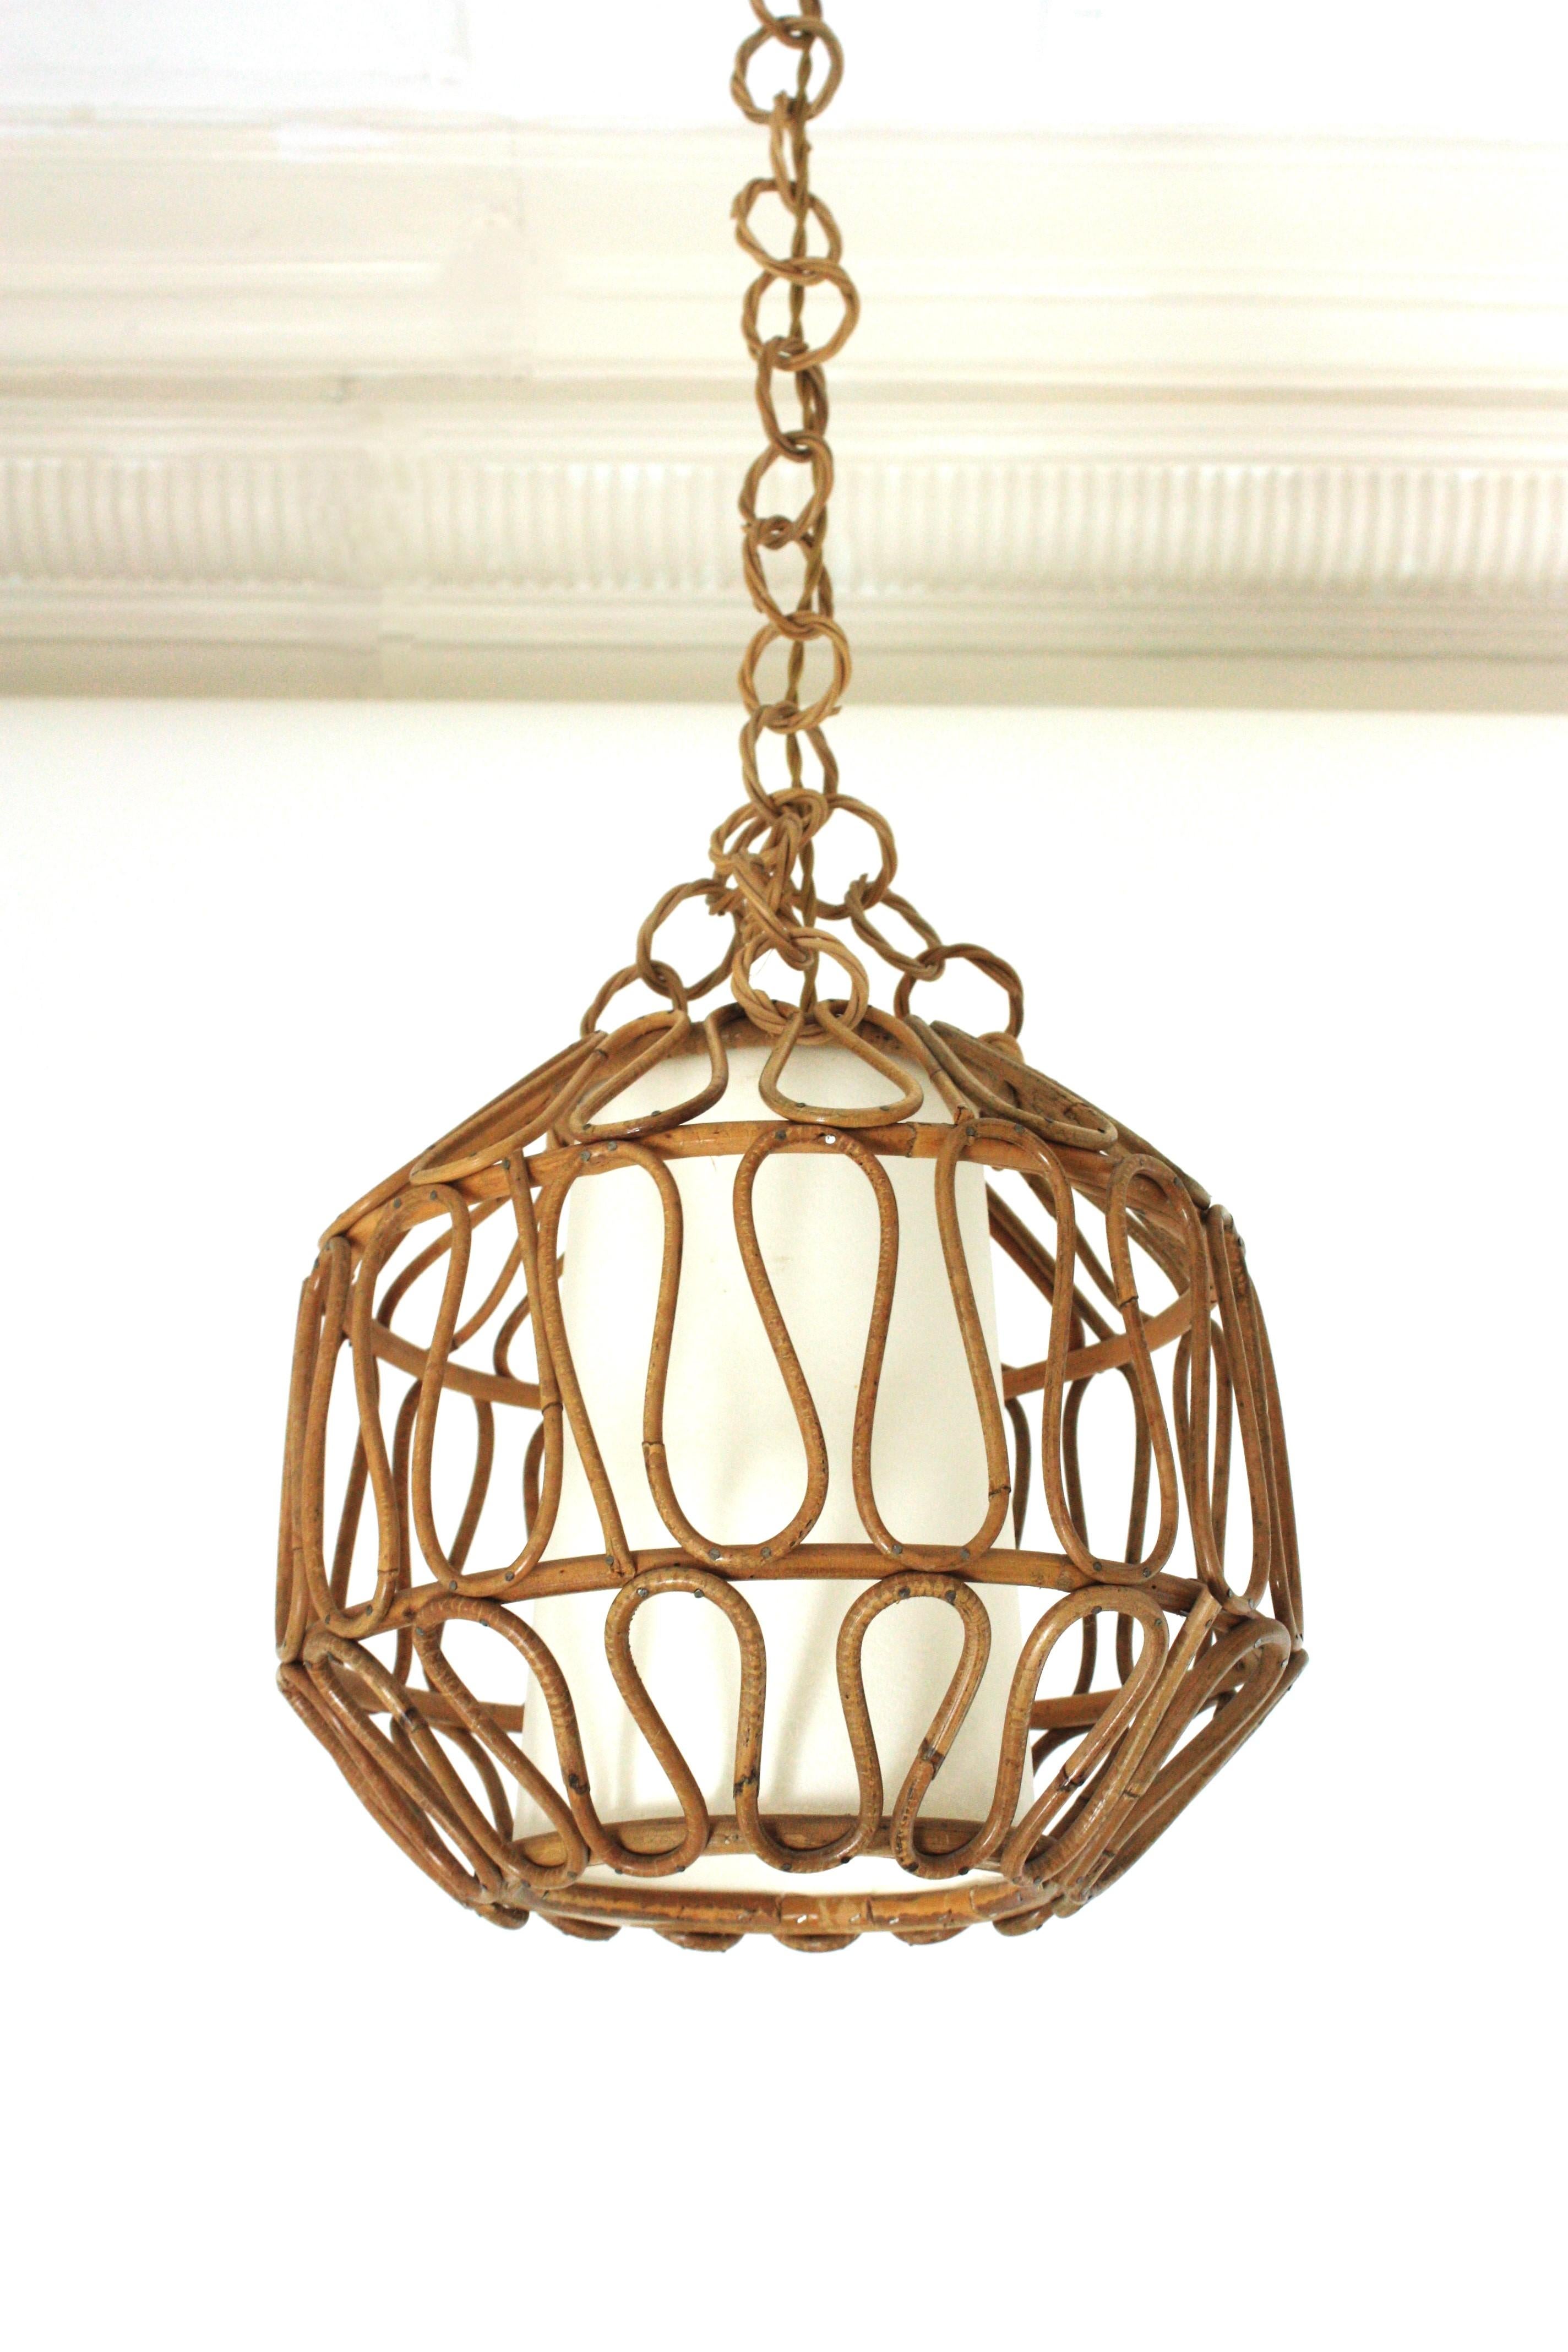 Rattan Globe Pendant Light or Lantern with Loop Details, Spain, 1960s For Sale 4